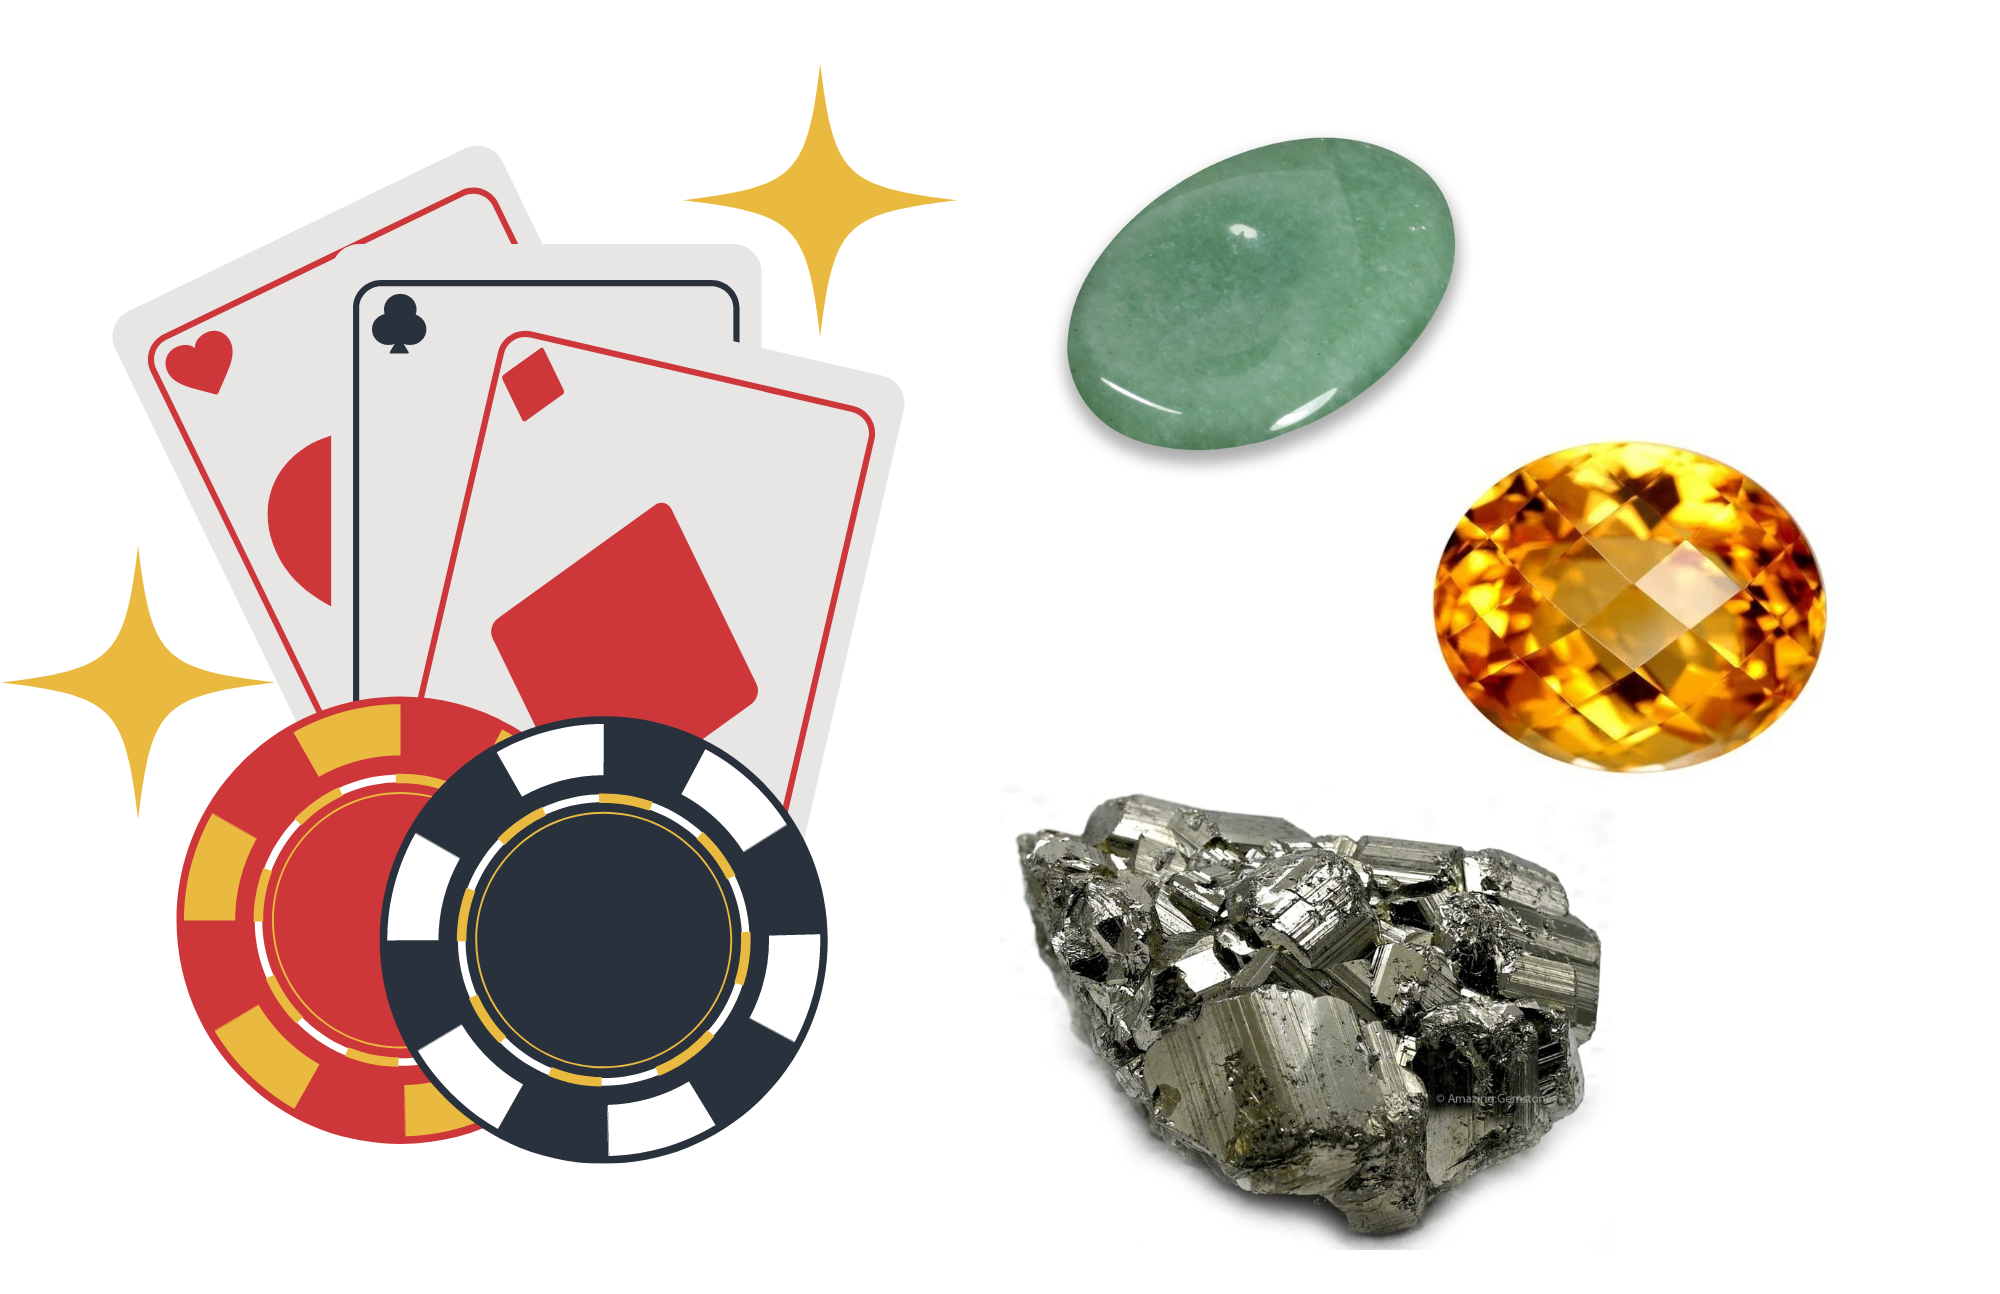 Ideal Luck Stones For Casino Workers - What Details Should They Be Informed Of?